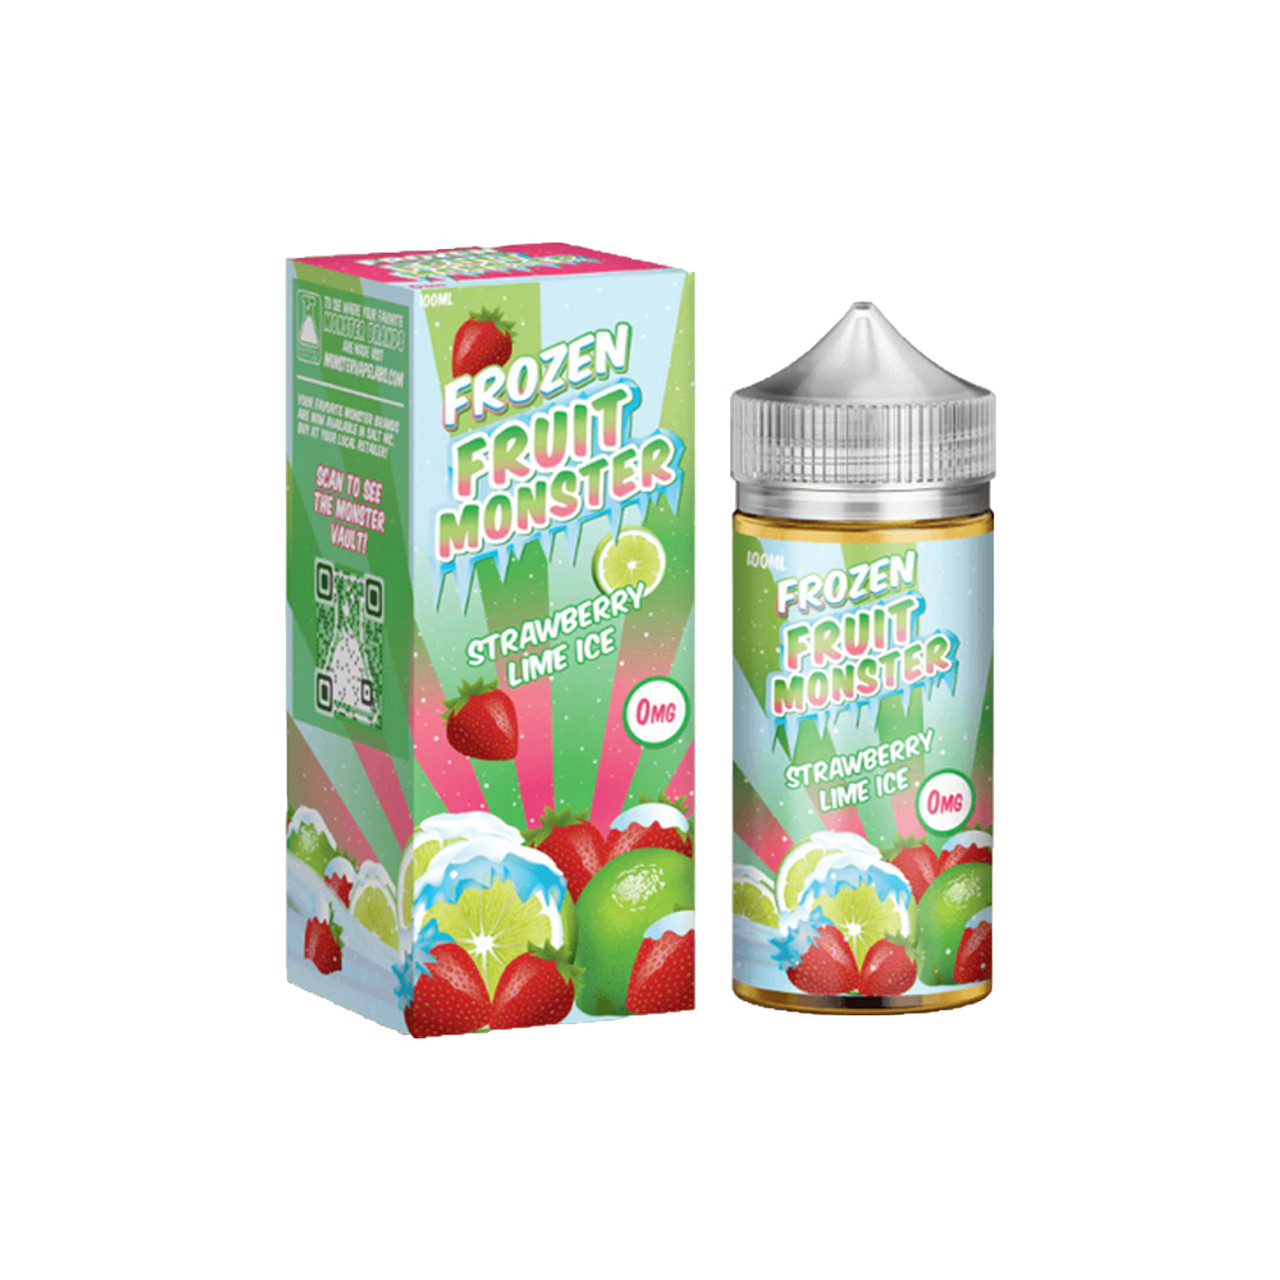 Frozen Fruit Monster Synthetic Nicotine E-Liquid 100ML - Strawberry Lime Ice